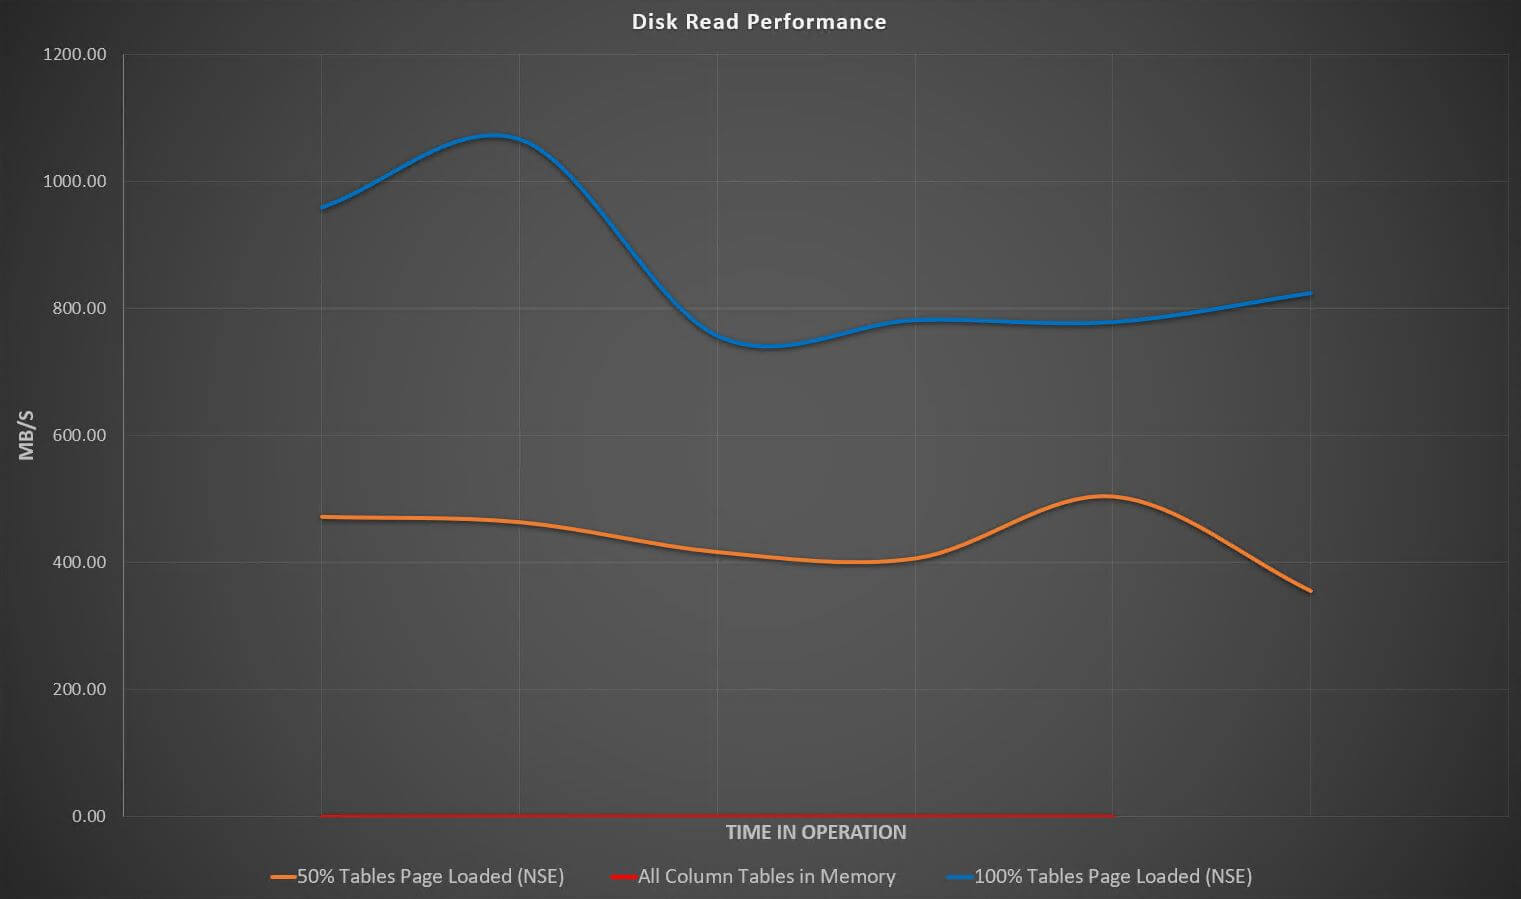 Disk Read Performance With and Without NSE